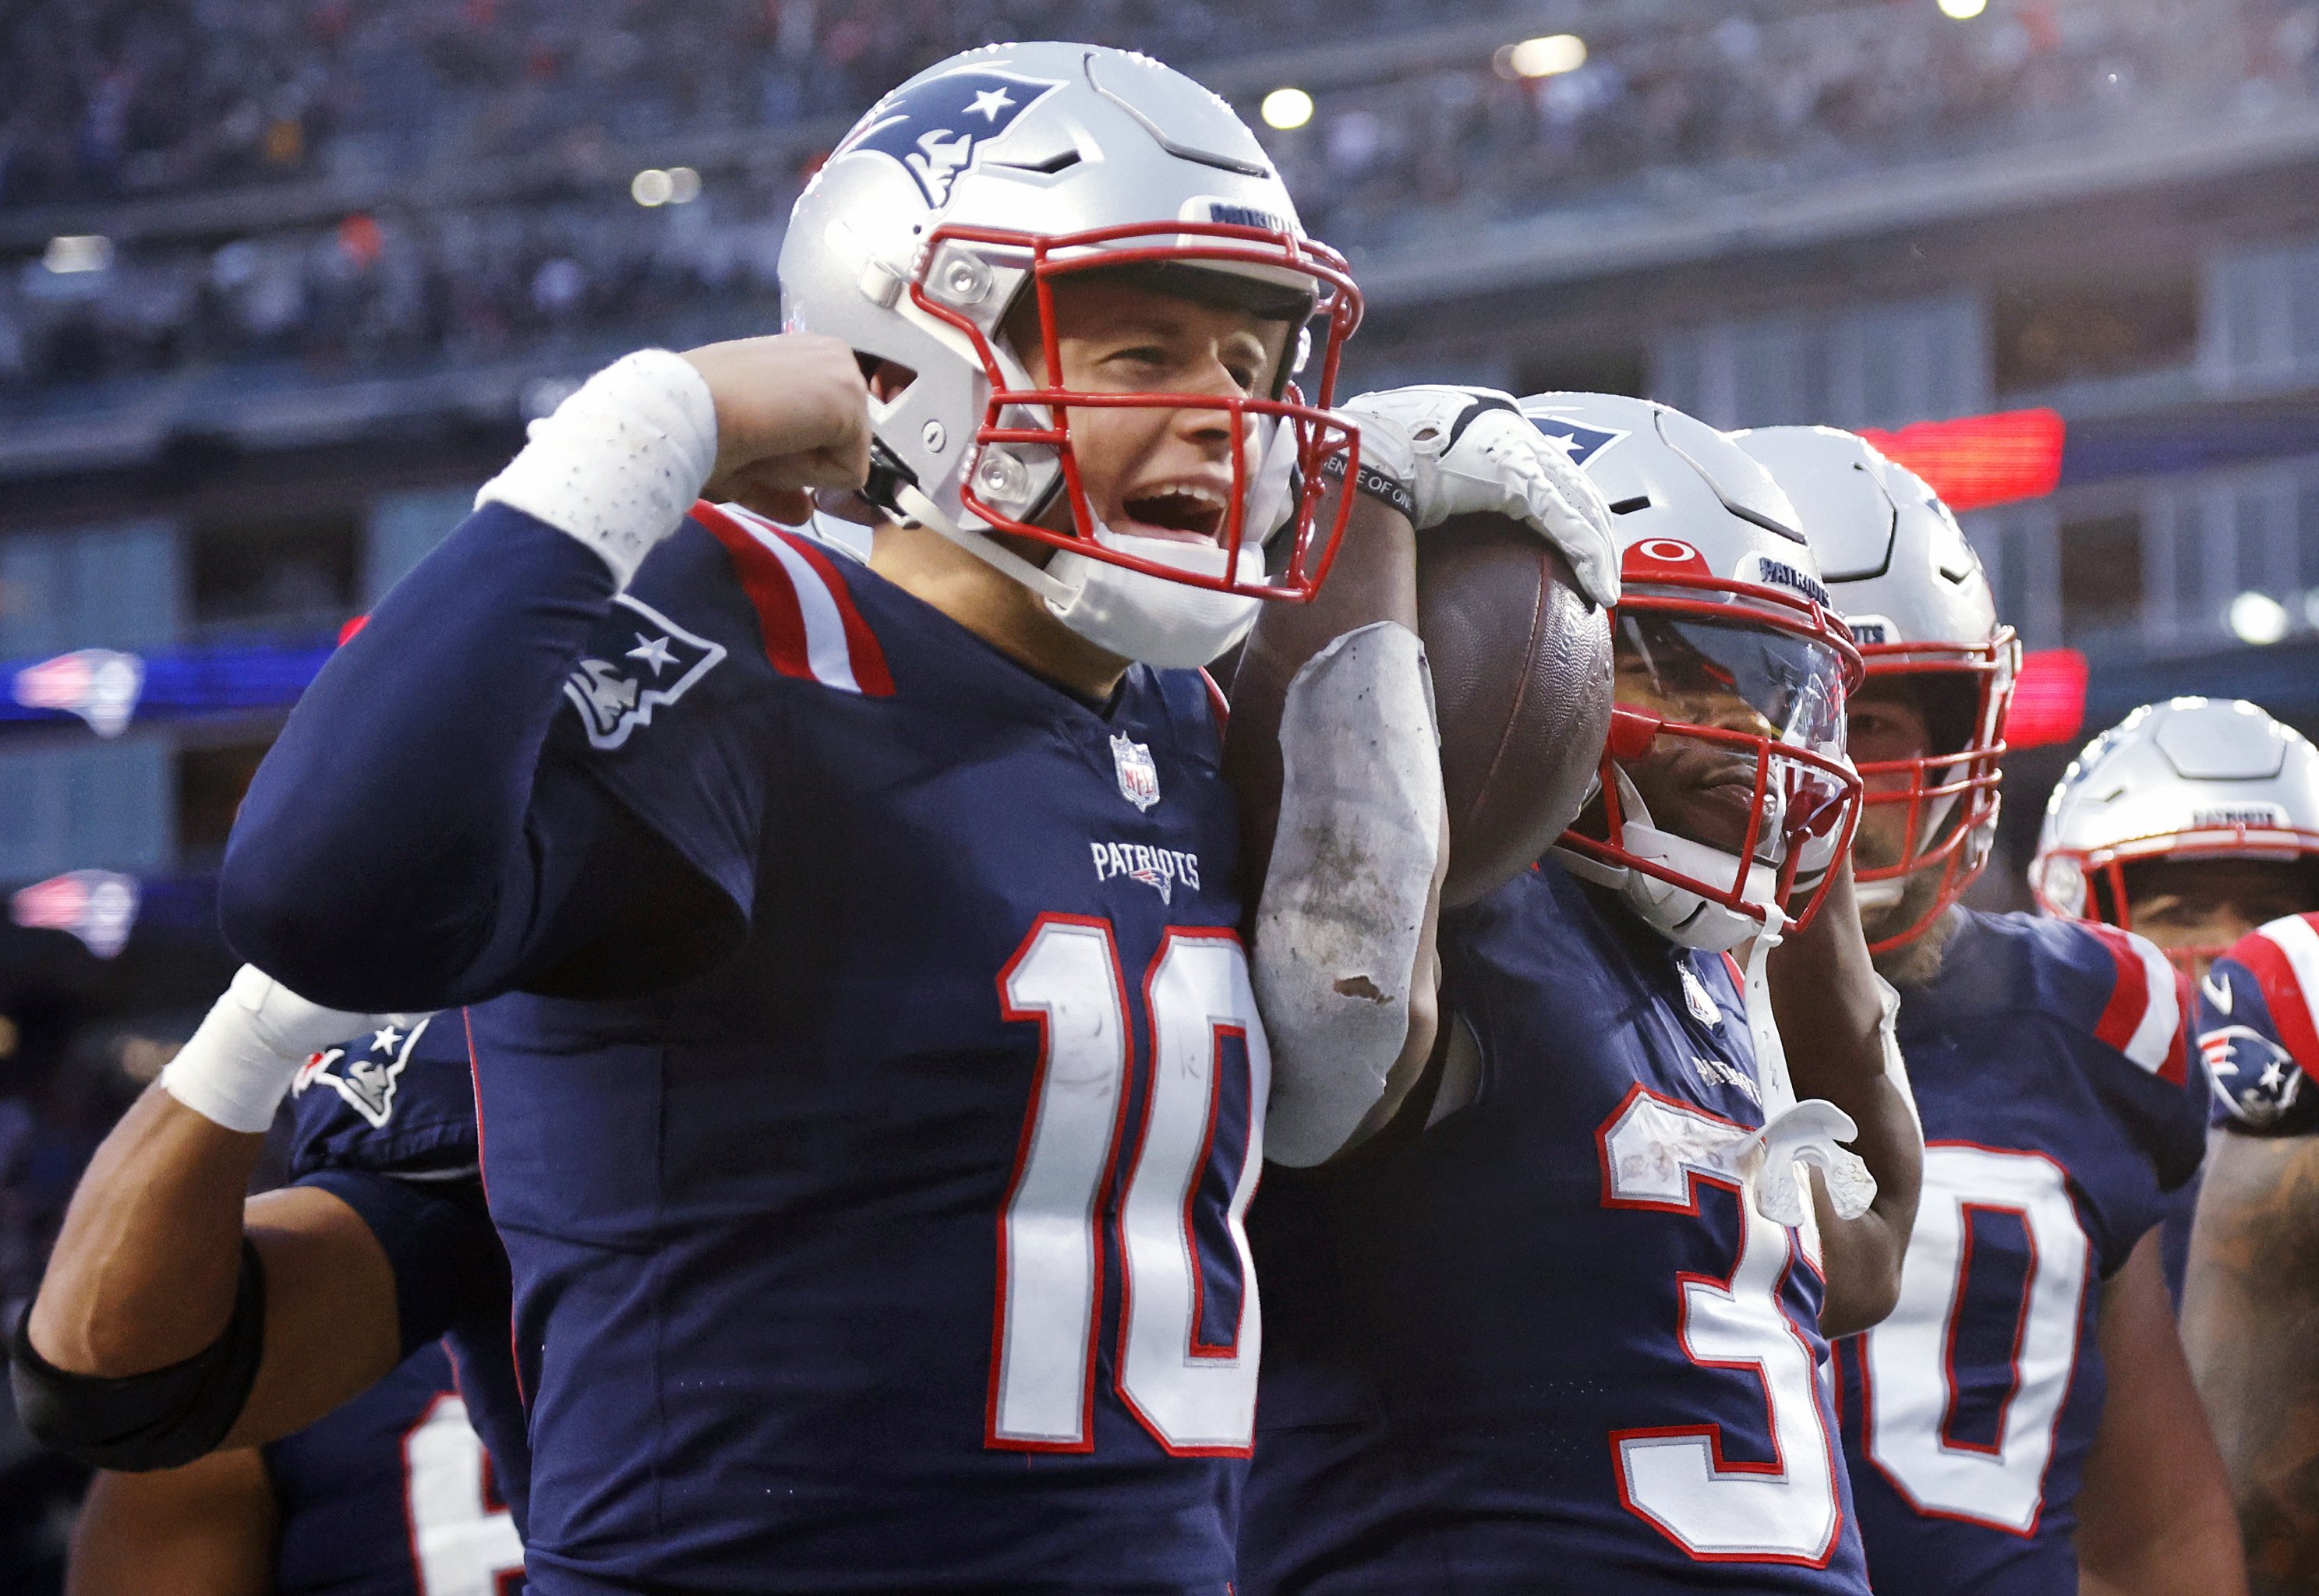 NFL playoff picture 2021: Standings, brackets, scenarios after Chiefs- Chargers, Patriots-Colts, plus Week 15 outlook - ABC7 Los Angeles